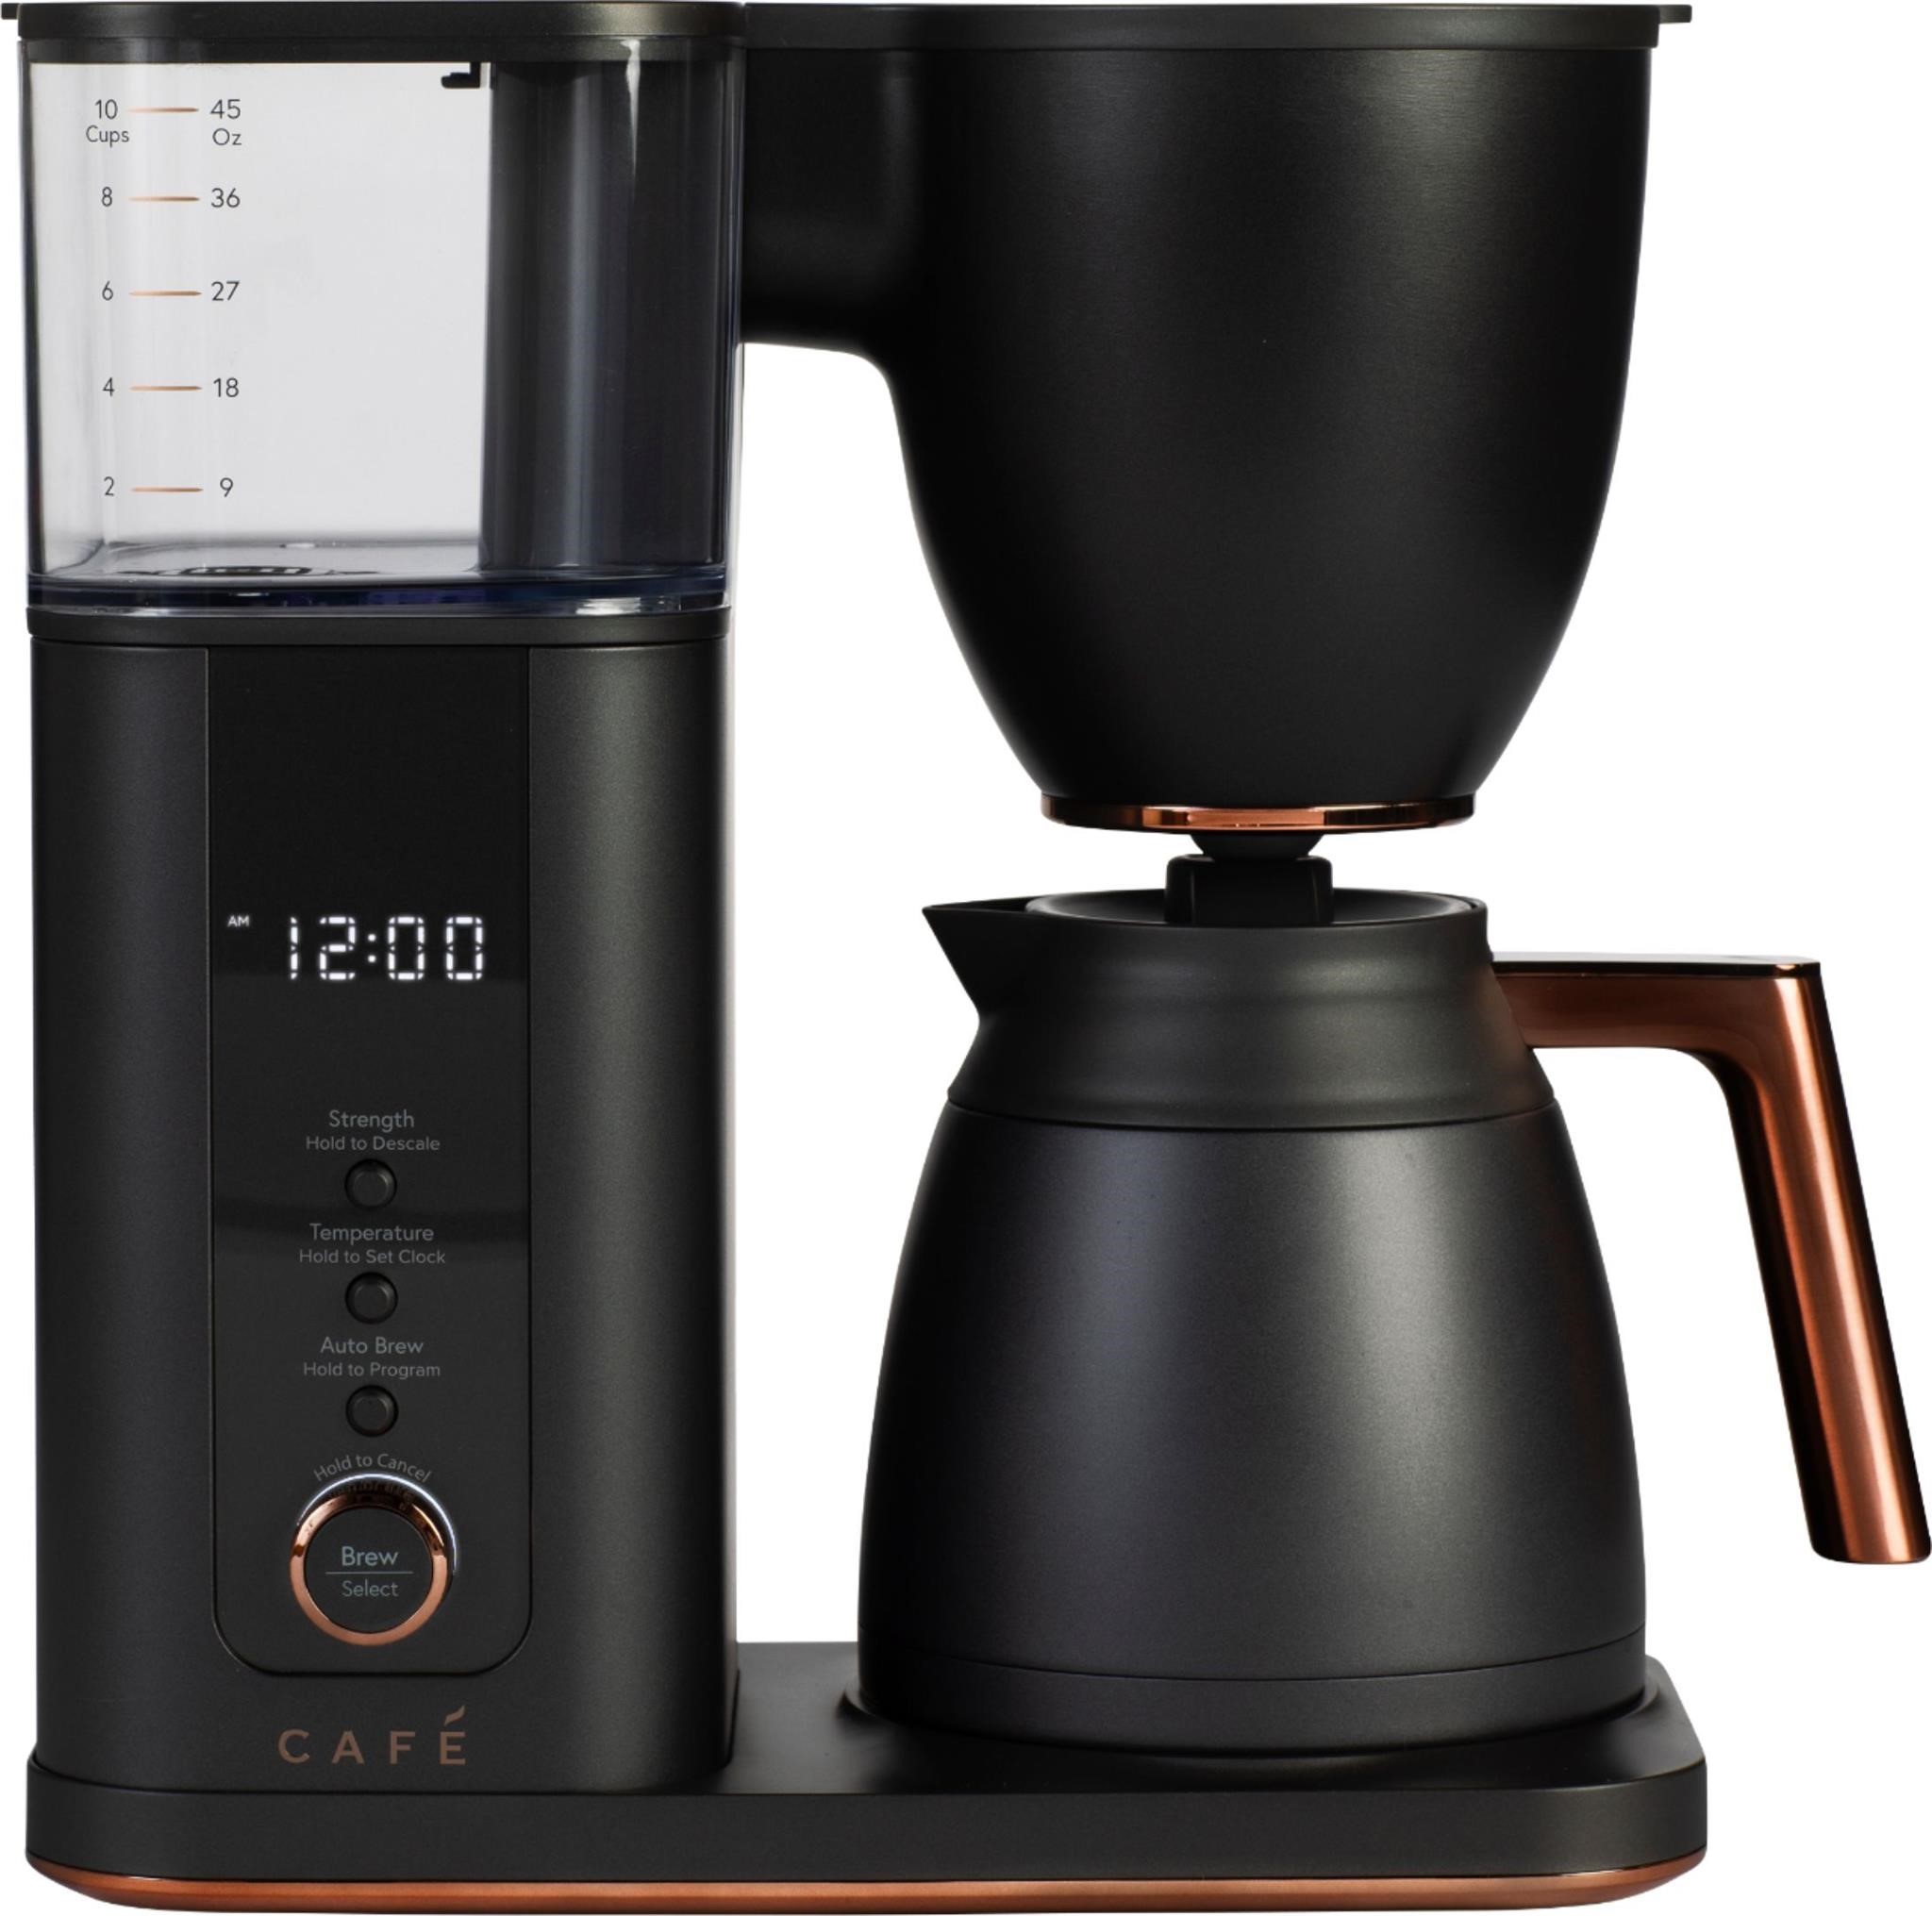 Smart Drip 10-Cup Coffee Maker with WiFi - Black